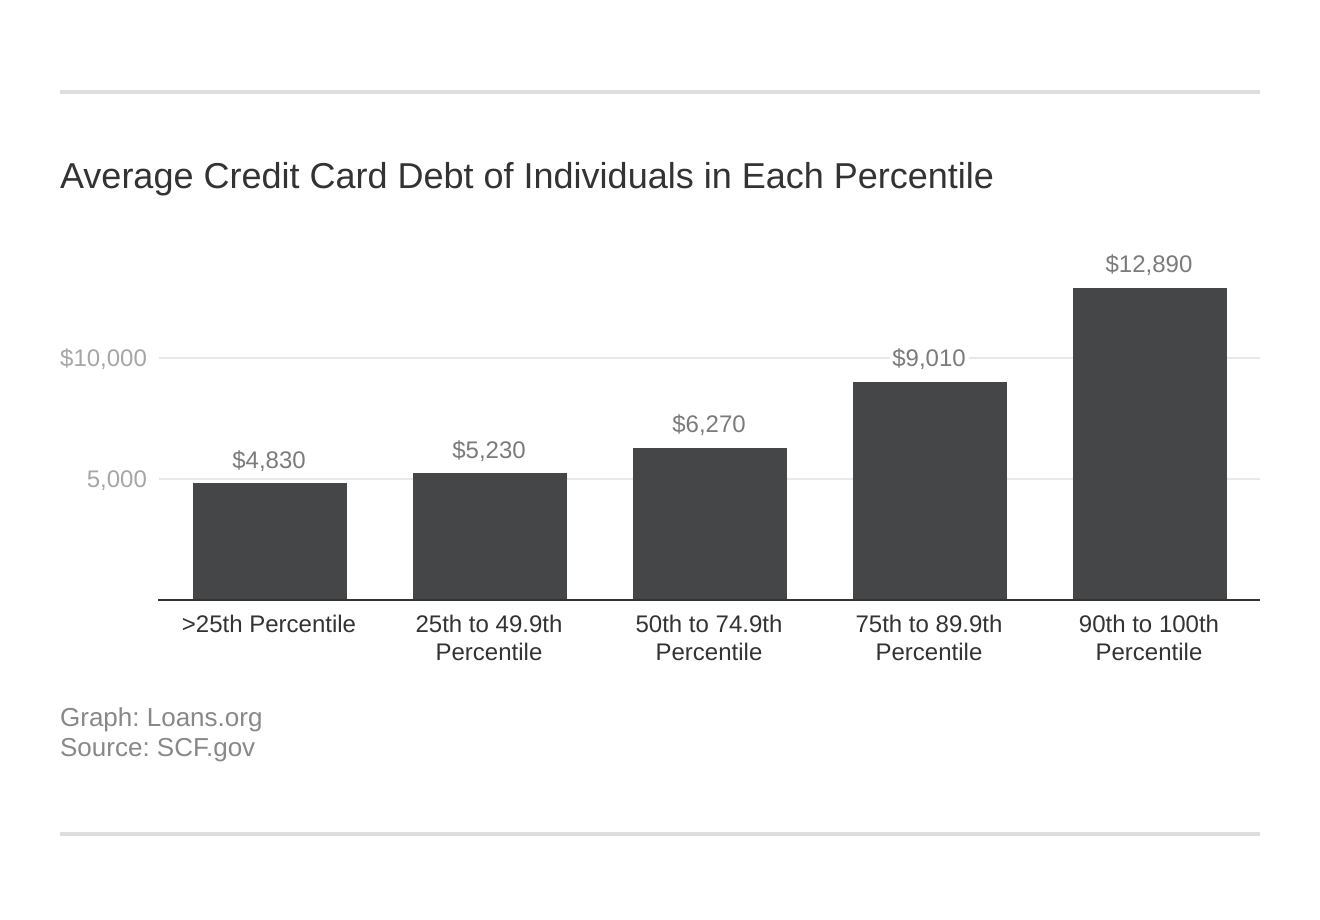 Average Credit Card Debt of Individuals in Each Percentile